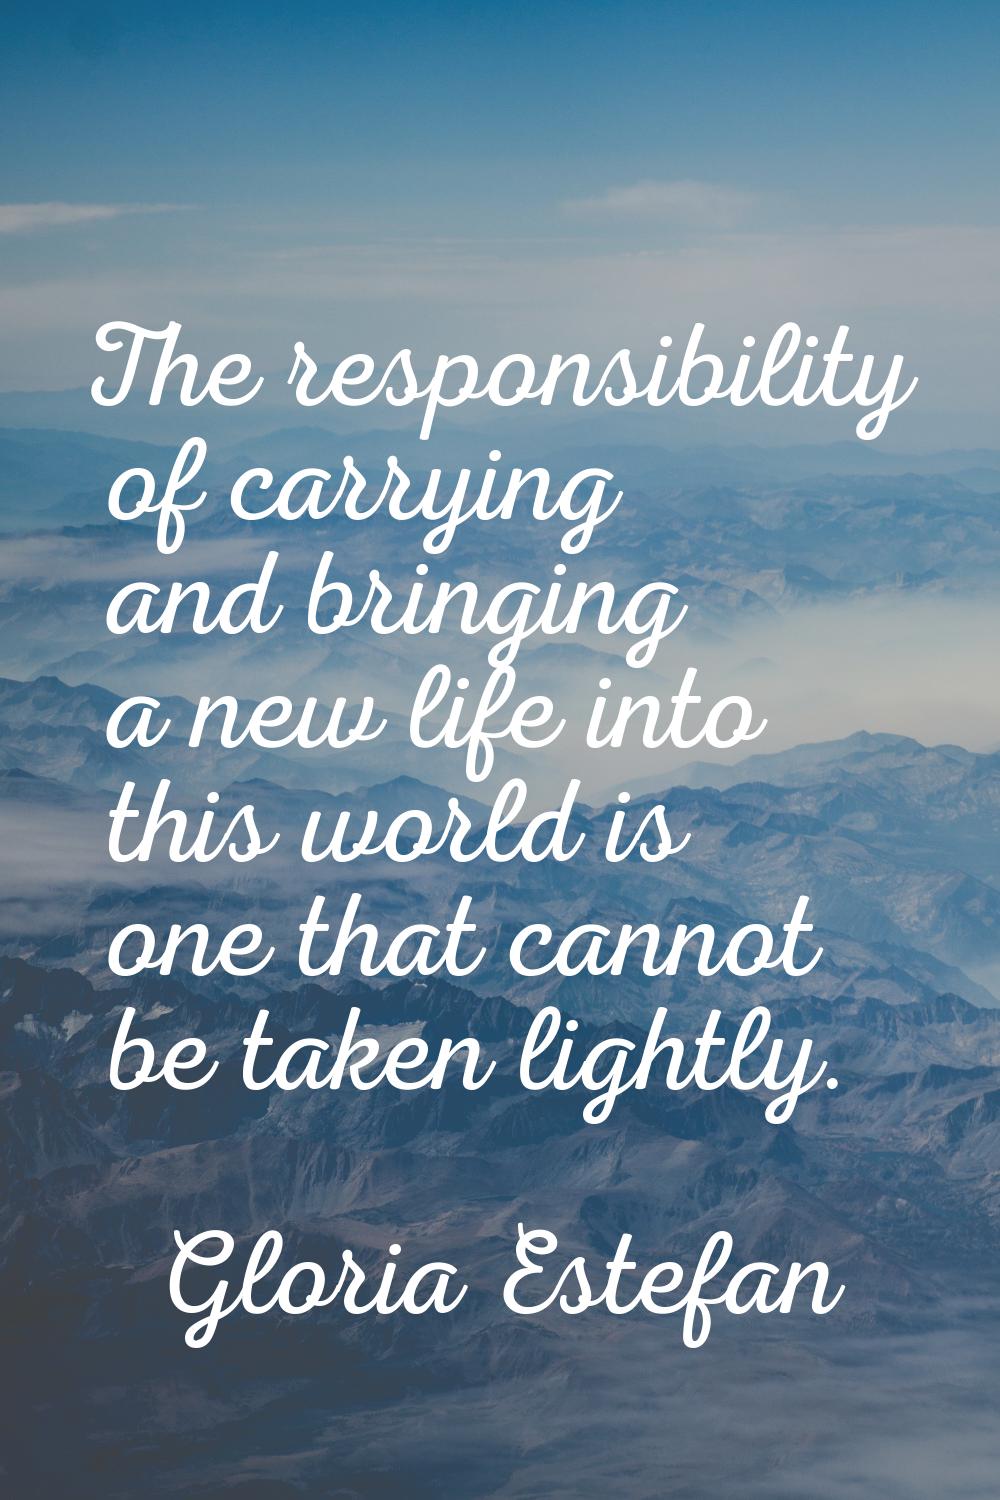 The responsibility of carrying and bringing a new life into this world is one that cannot be taken 